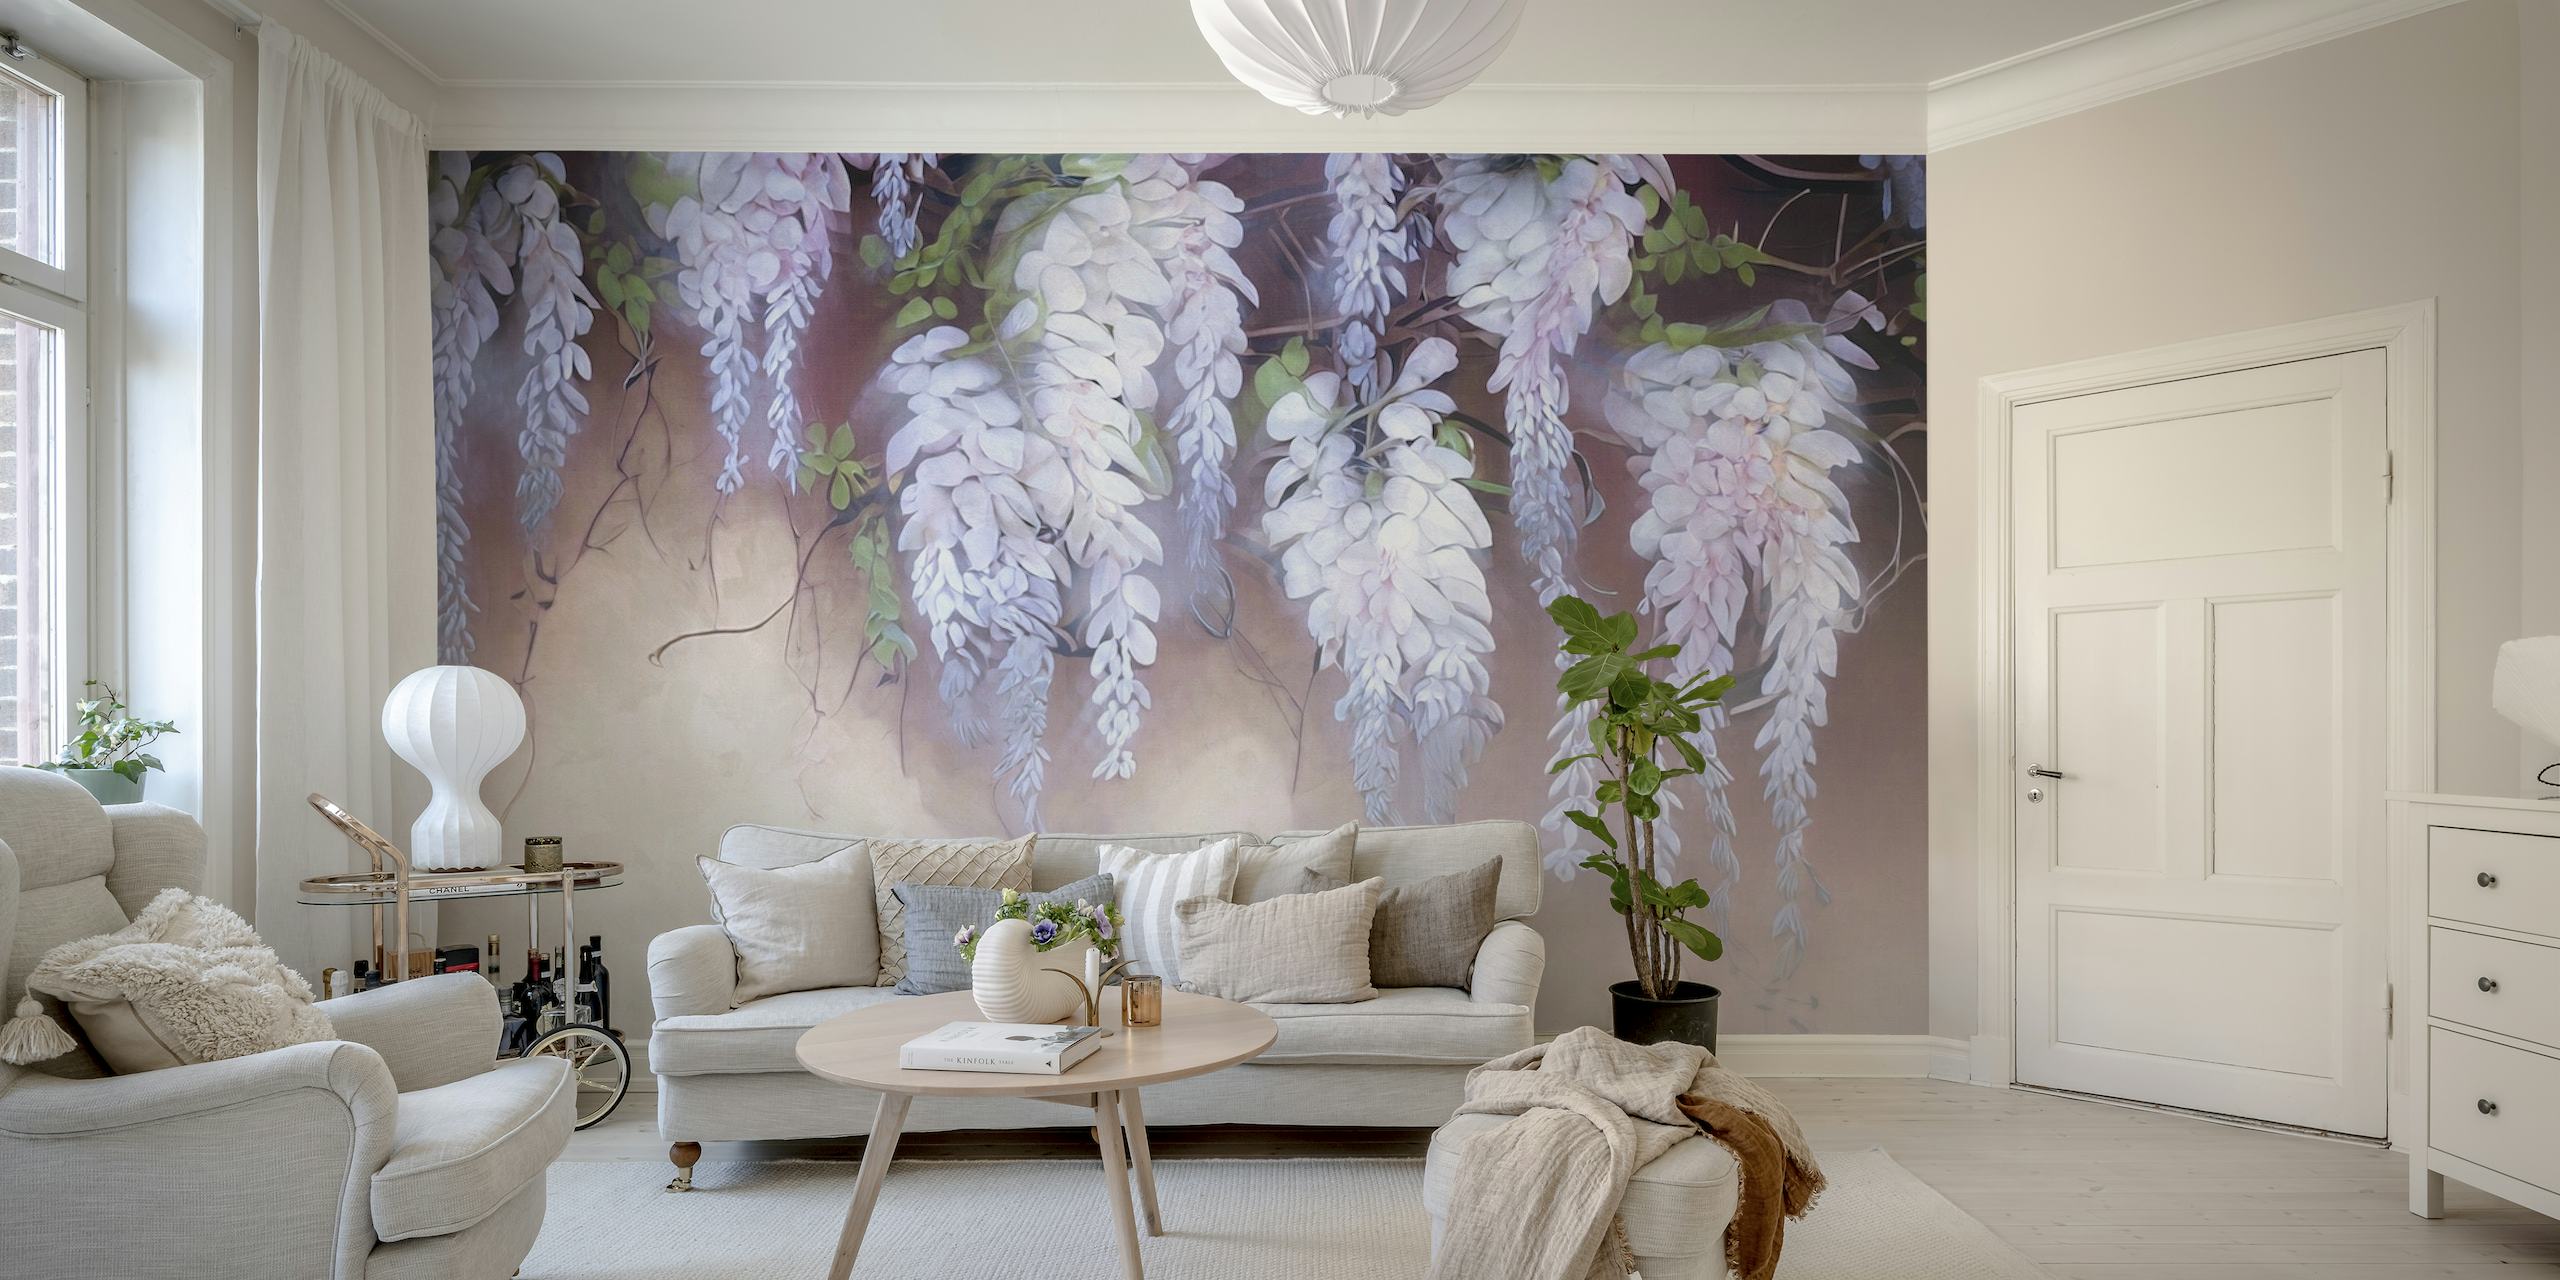 Floral wisteria wall wallpaper